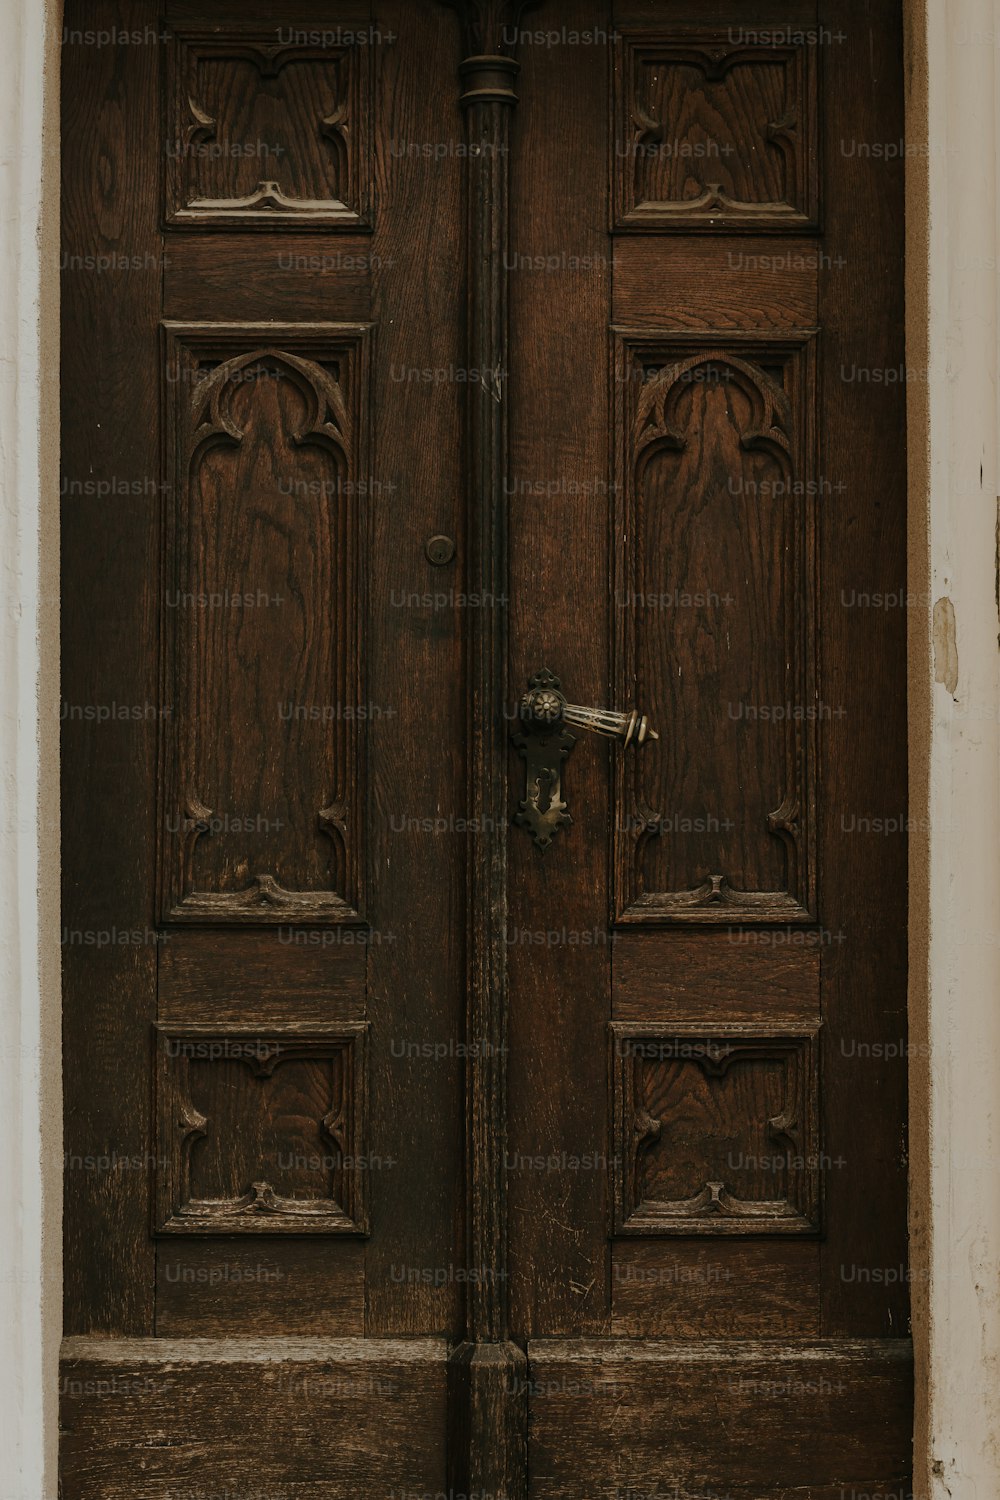 a close up of a wooden door with a clock on it